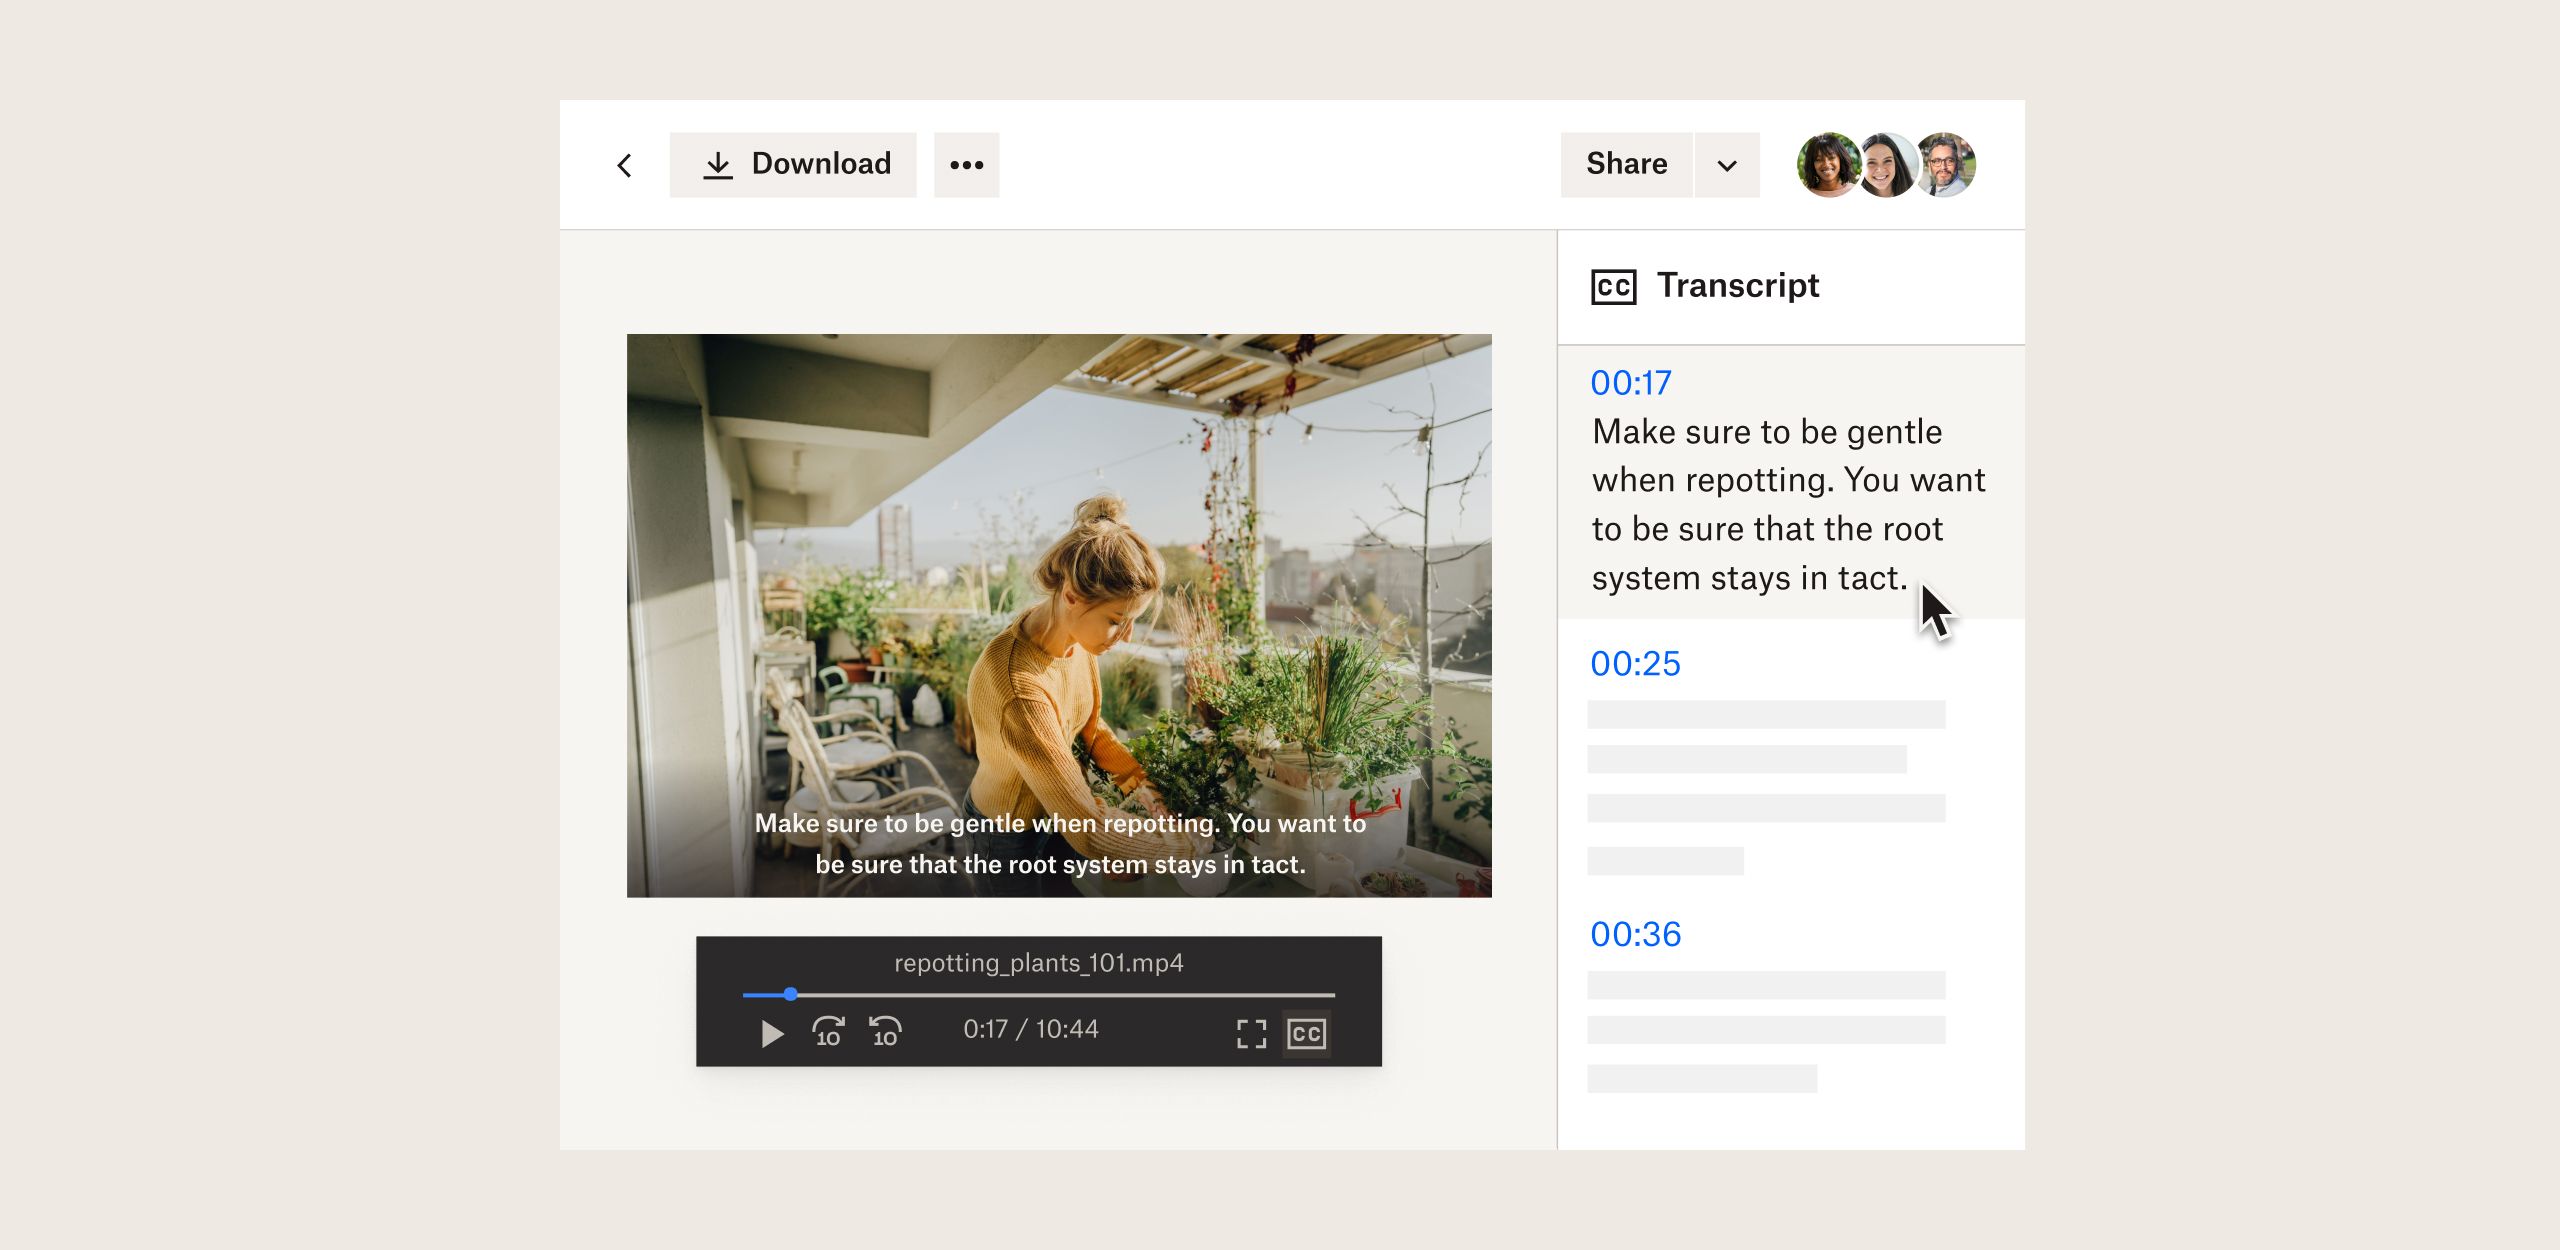 Preview of plant repotting video in Dropbox with transcriptions, captions and playback controls